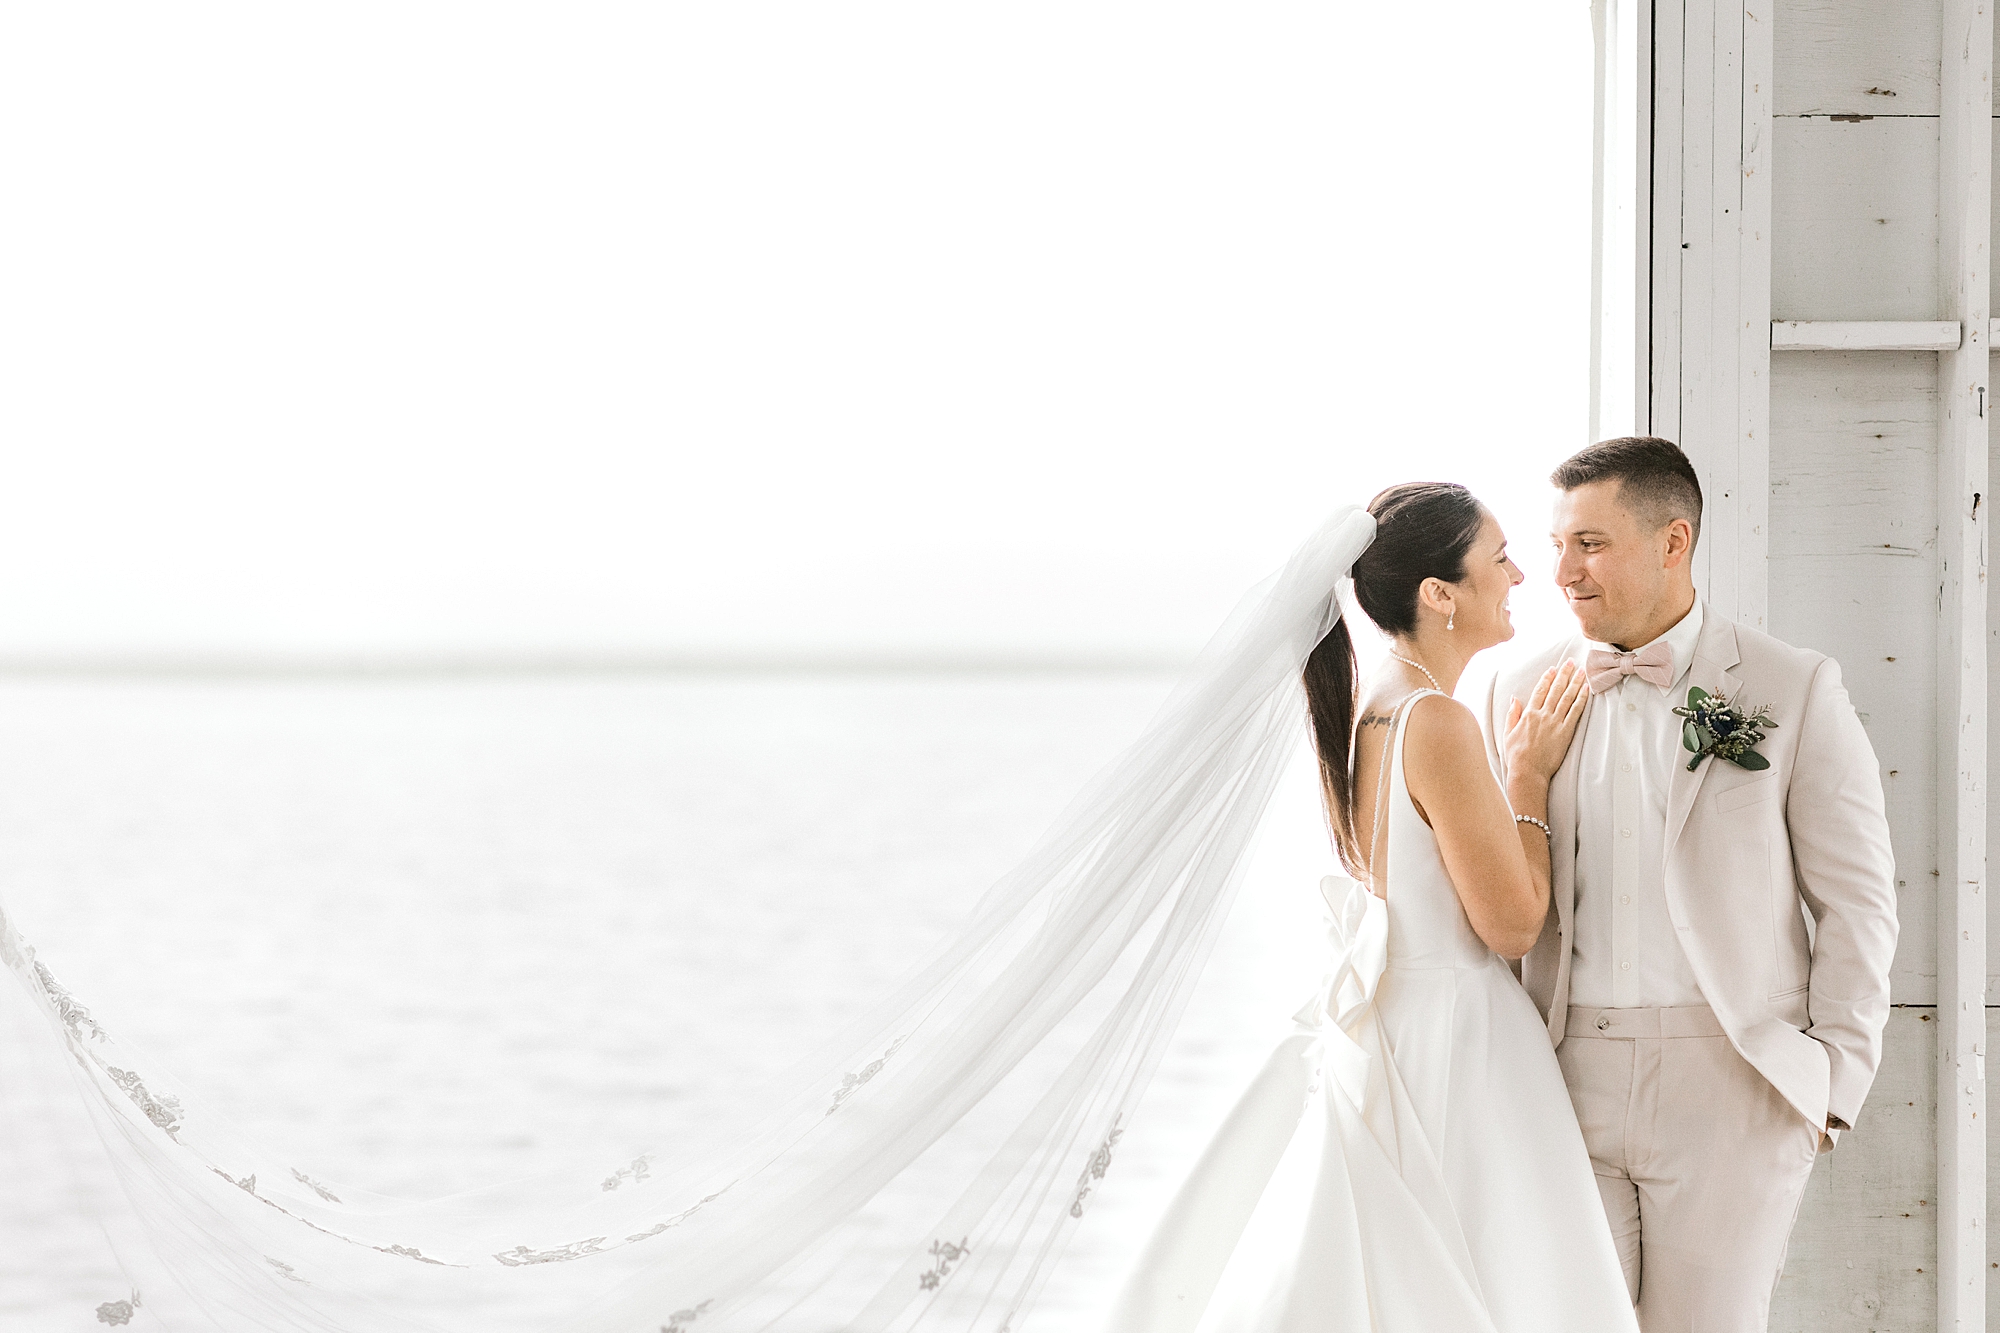 bride looks up at groom while veil floats behind them by window at Mallard Island Yacht Club